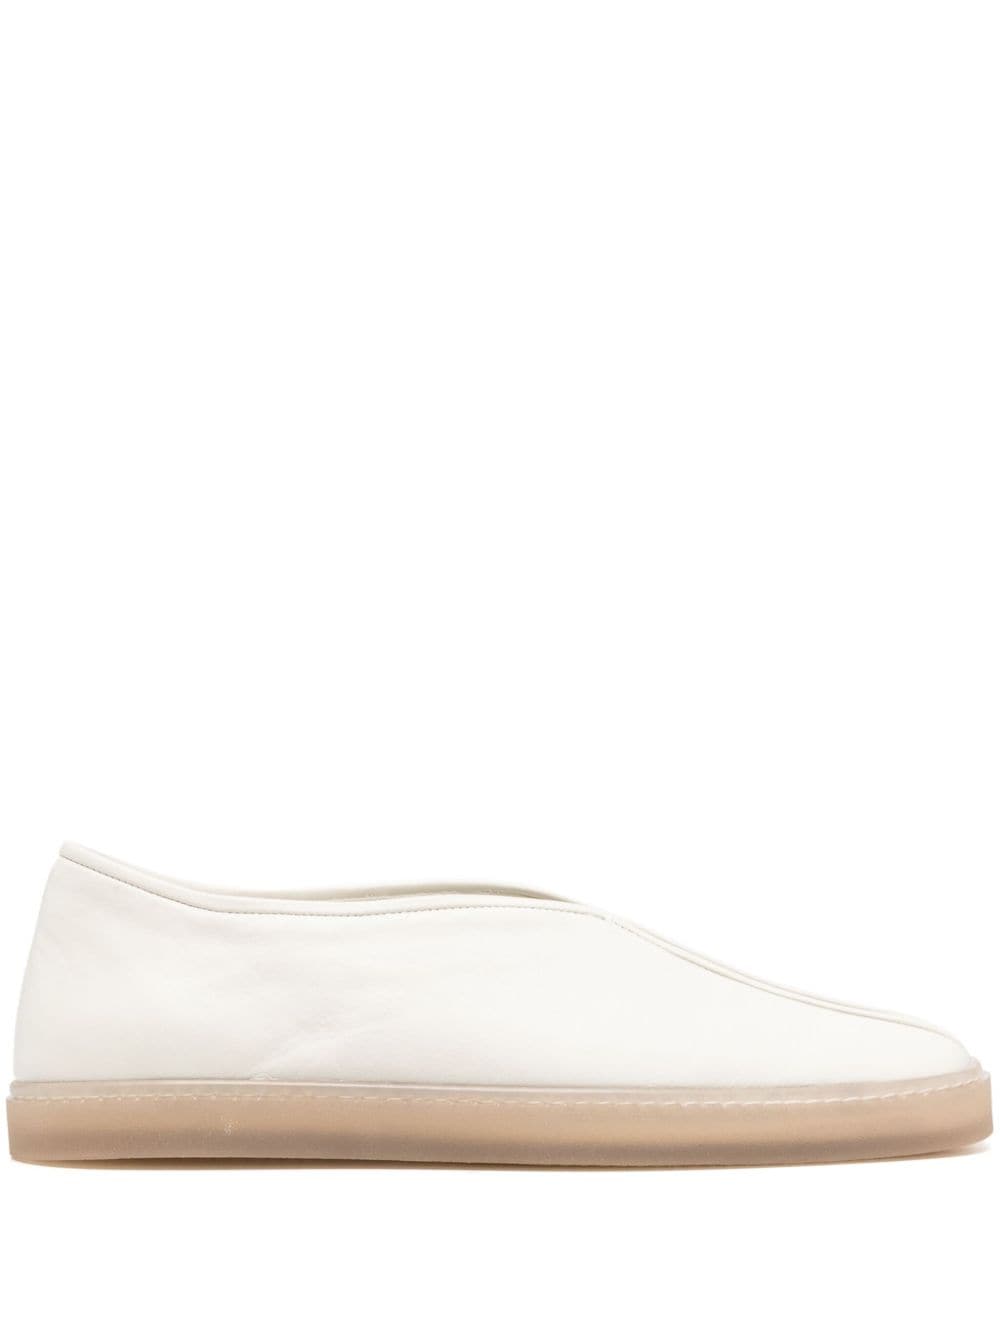 Image 1 of LEMAIRE Piped slip-on sneakers